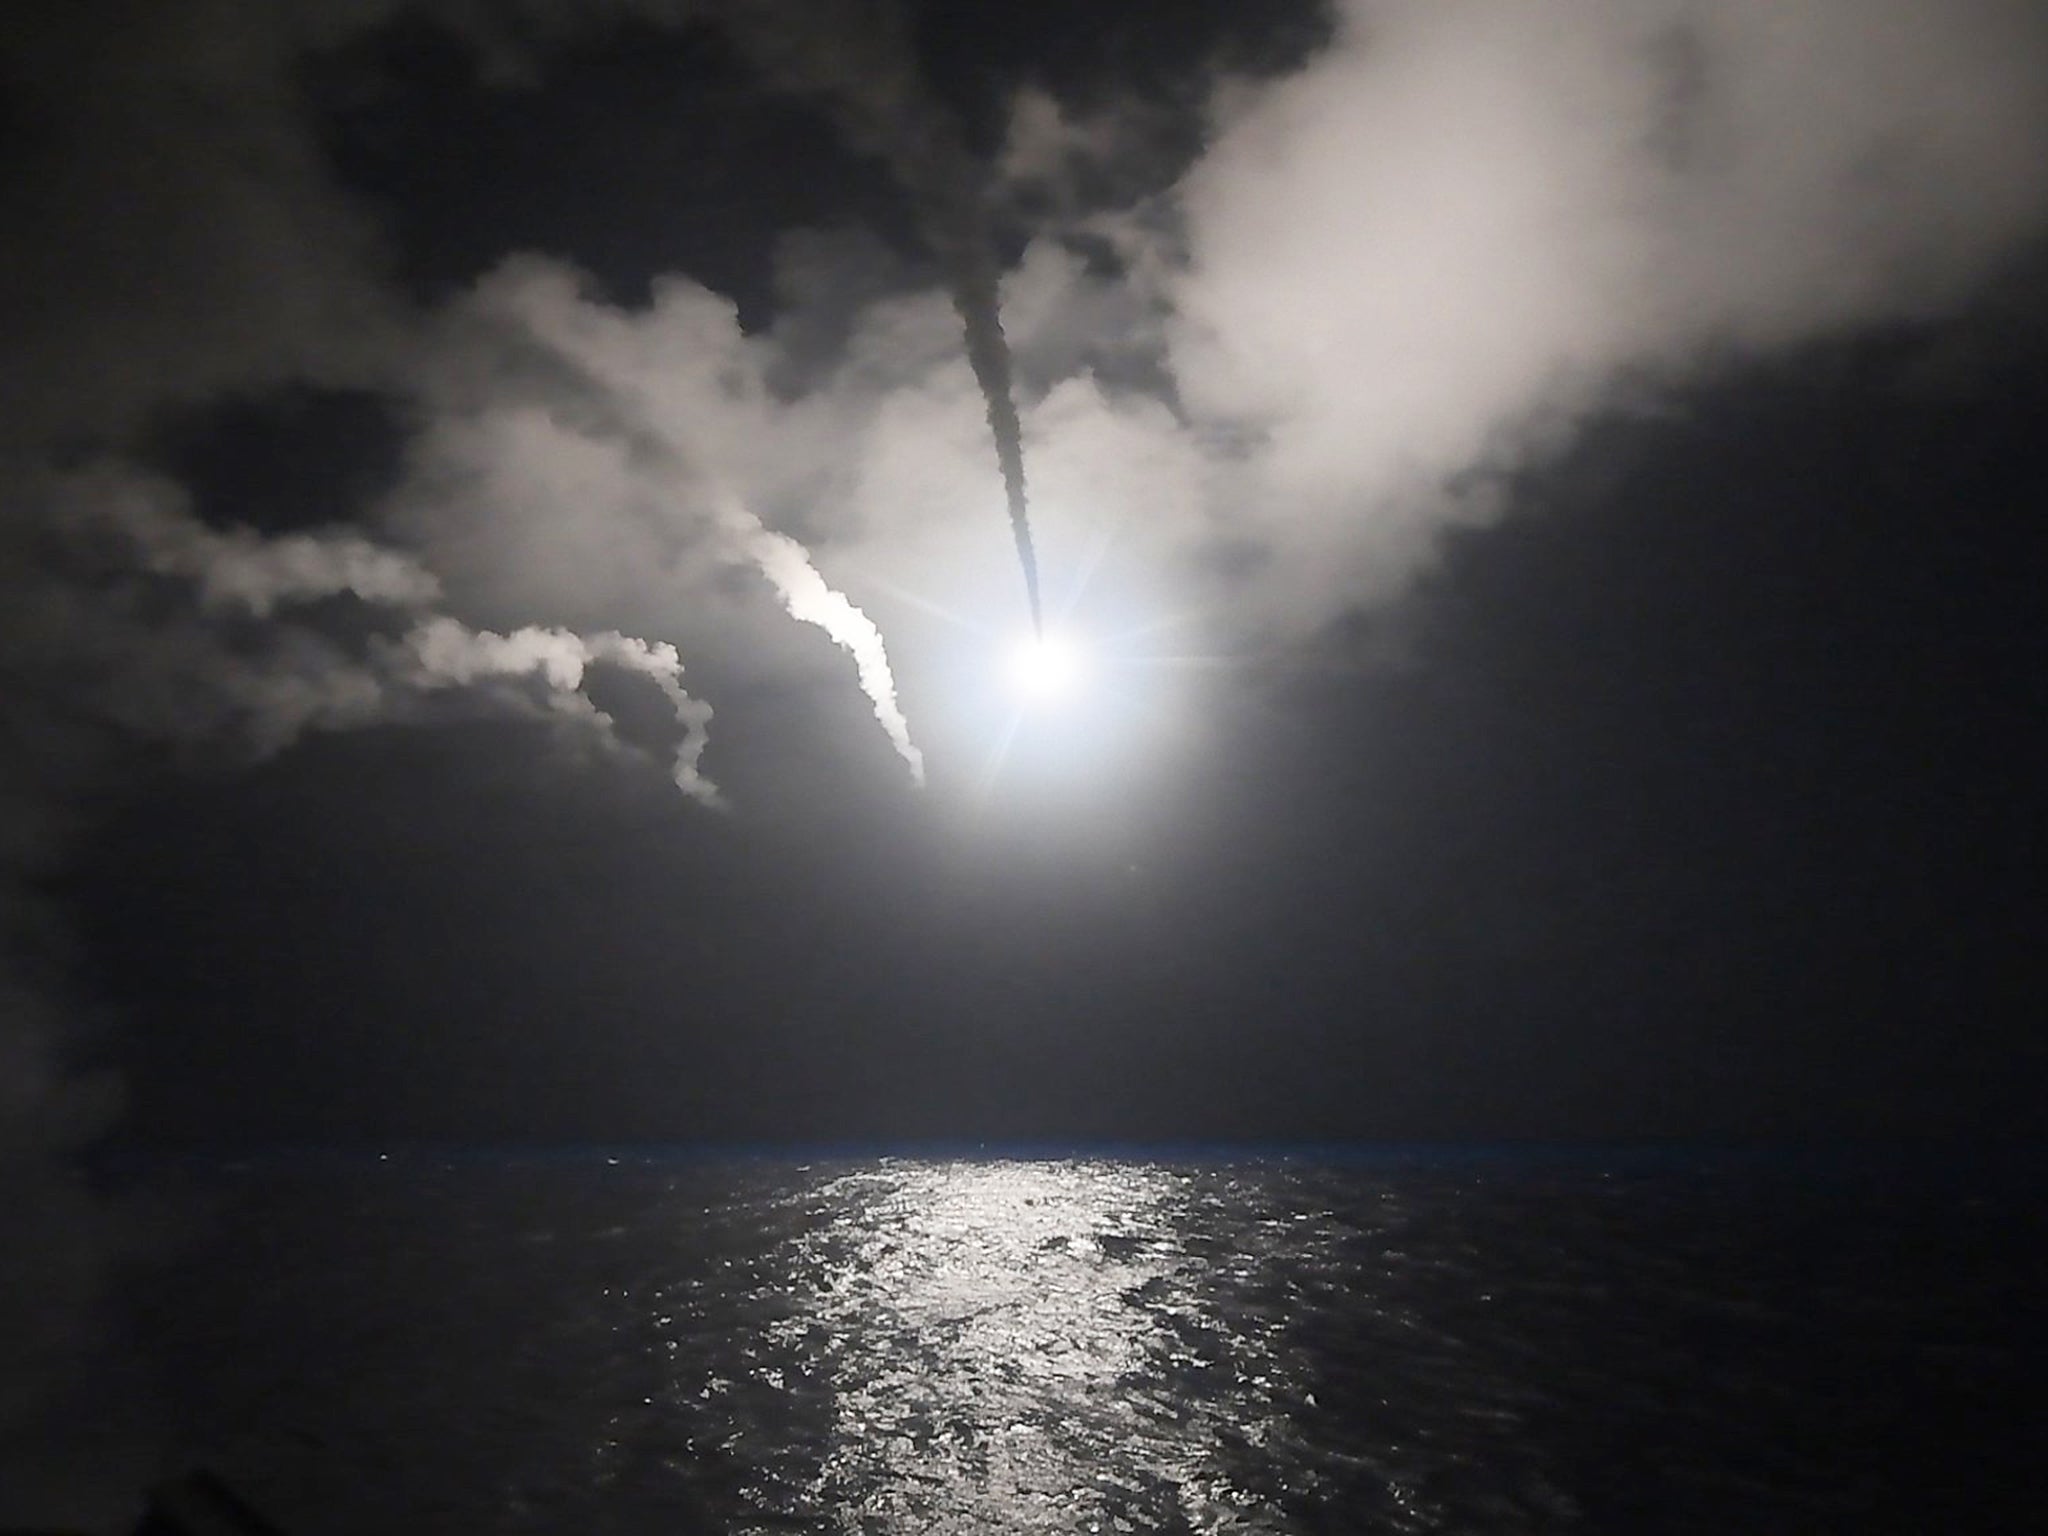 The United States military launched at least 50 tomahawk cruise missiles at al-Shayrat military airfield near Homs, Syria, in response to the Syrian military's alleged use of chemical weapons in an airstrike in a rebel held area in Idlib province